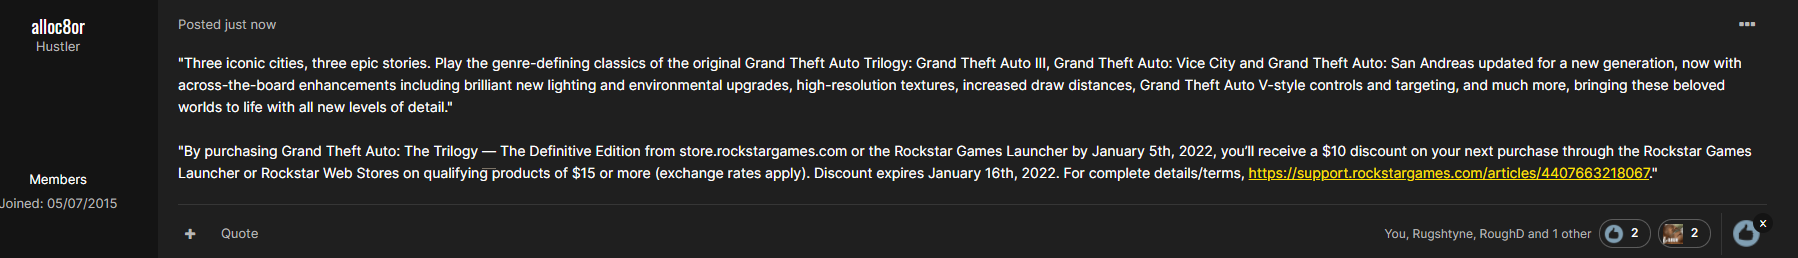 GTA Trilogy Definitive Edition enhancements listed on support page photo 2